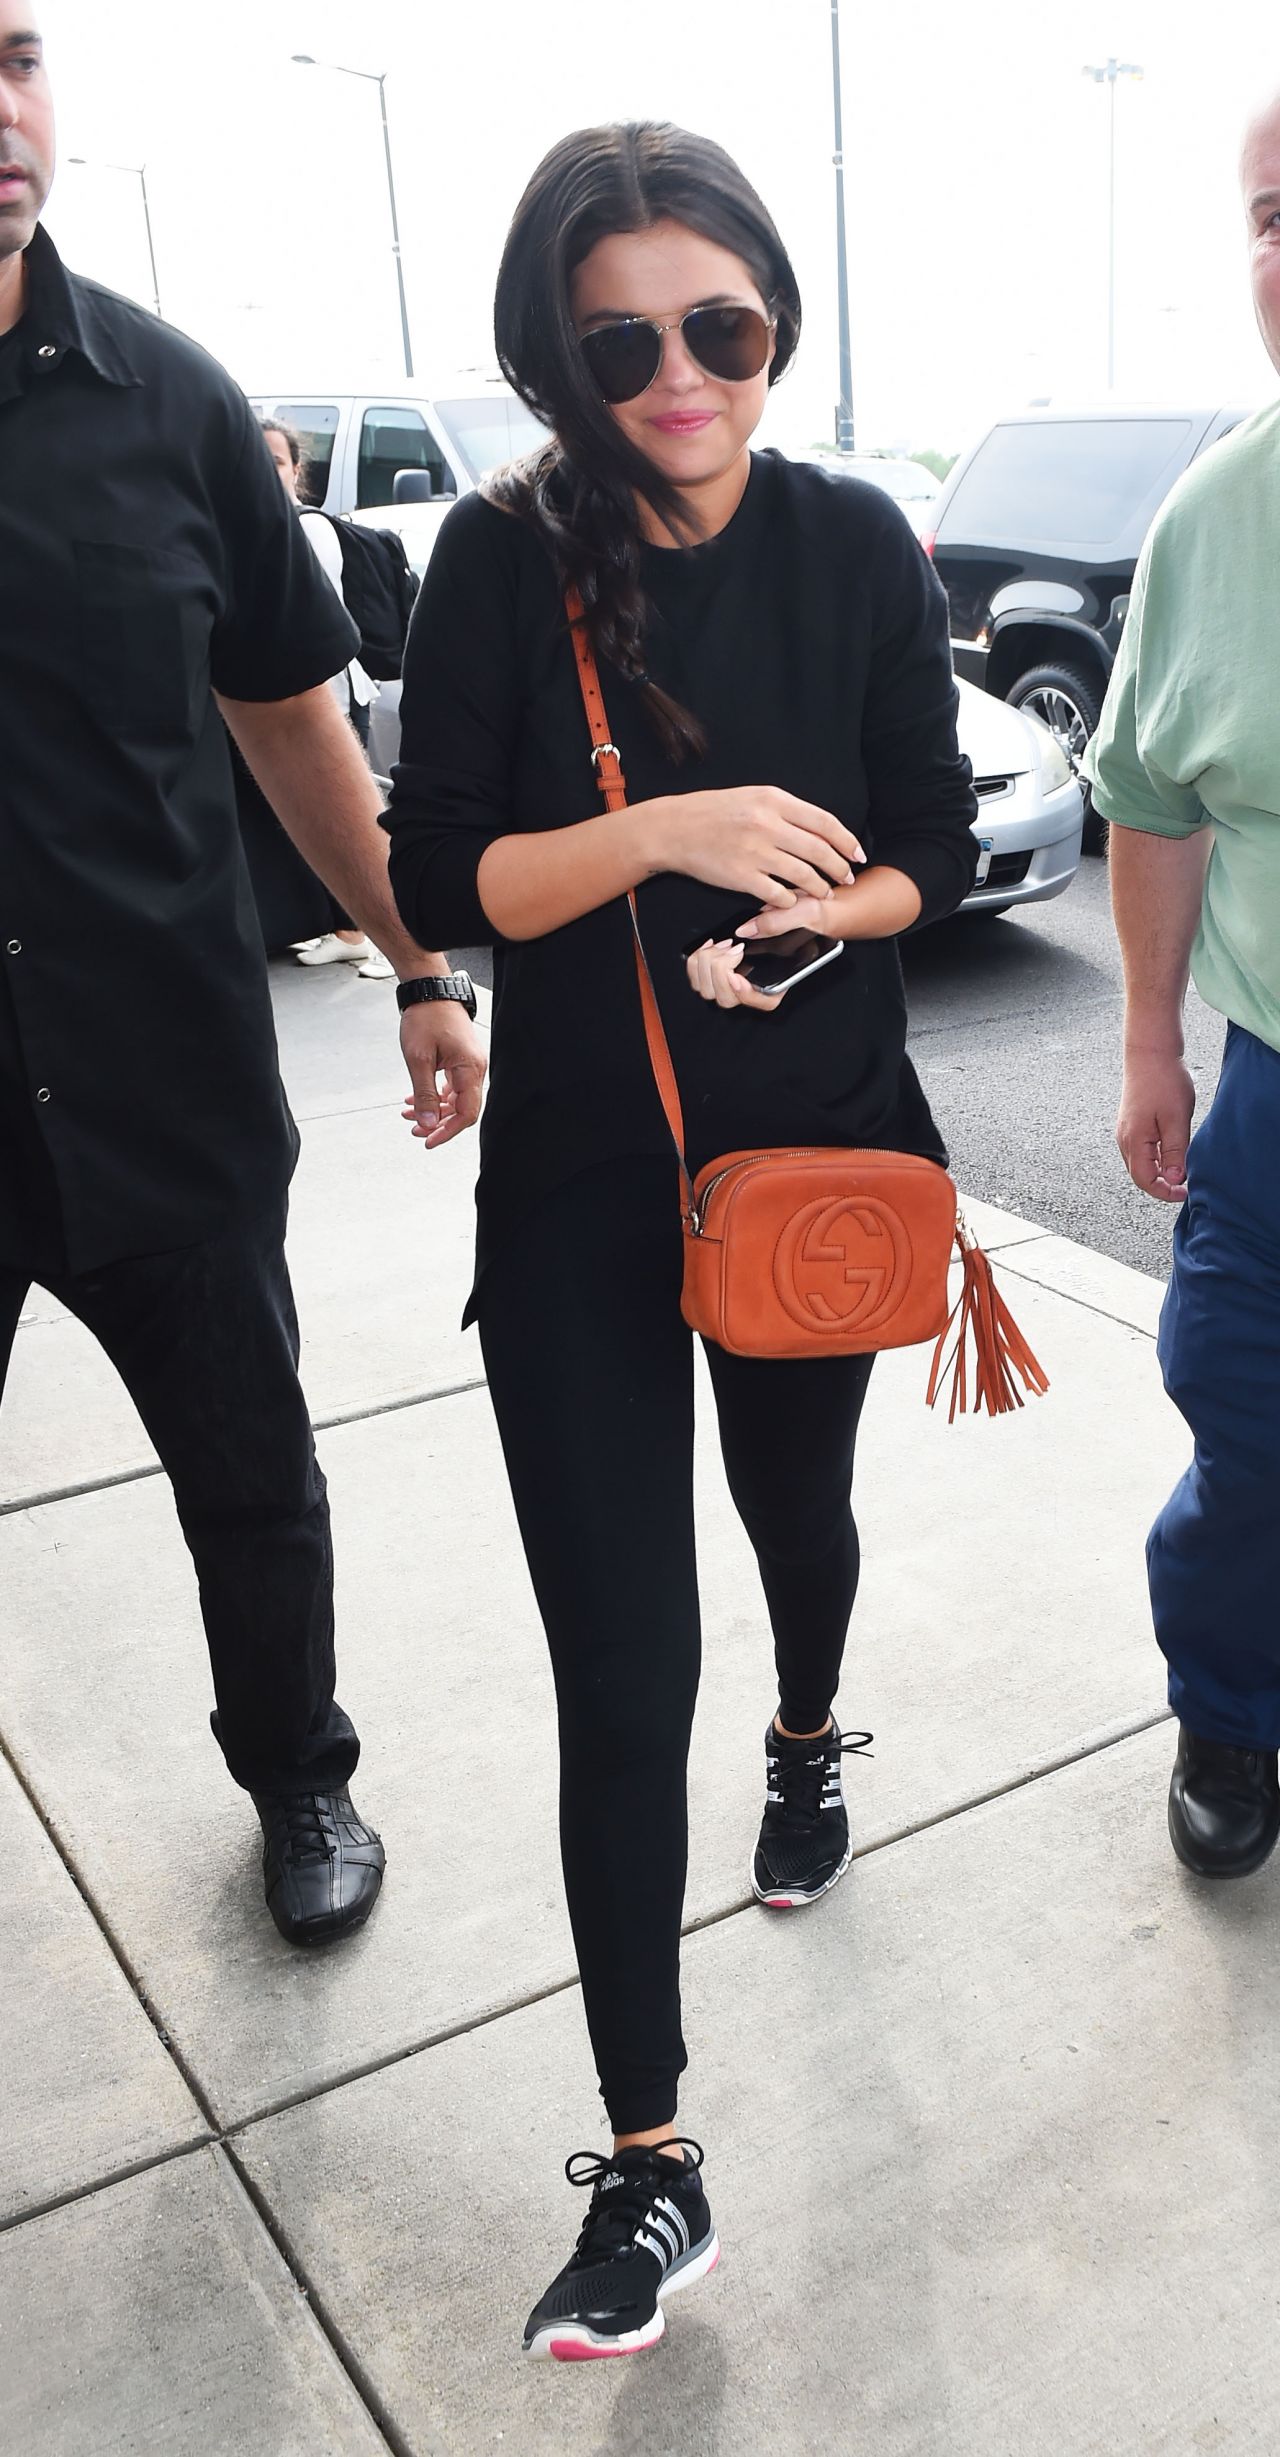 Selena Gomez Summer Airport Outfit - JFK Airport in NYC, June 2015 ...